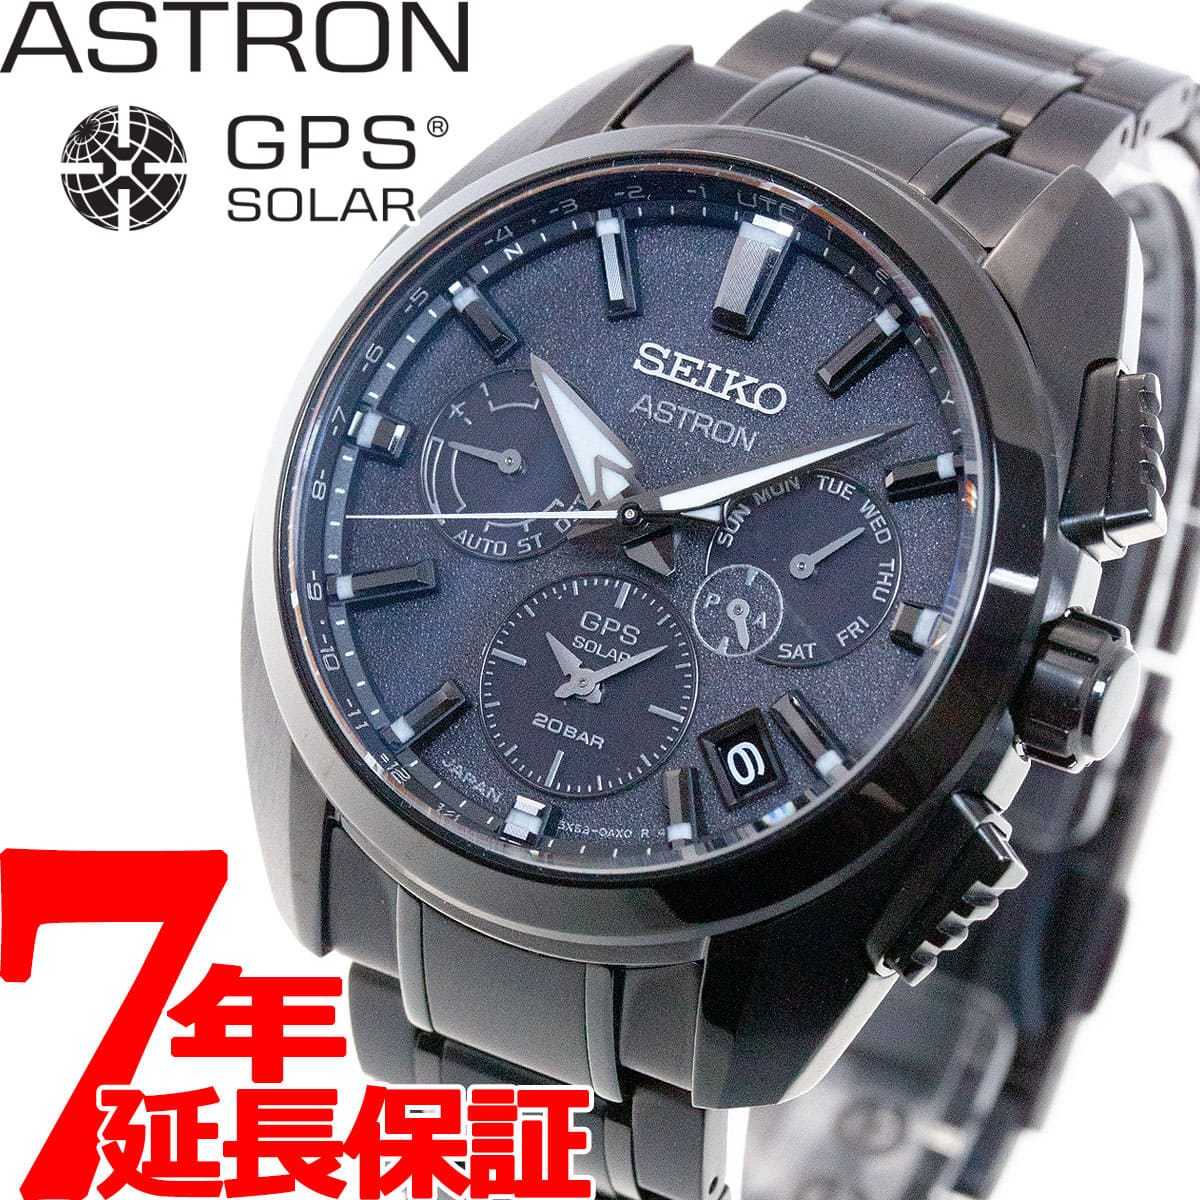 New]up to 2,000 & up to 53 times! Model mens SBXC069 for exclusive use of  April 23 20:00 - April 28 1:59 loan SEIKO ass Tron SEIKO ASTRON GPS solar  watch solar